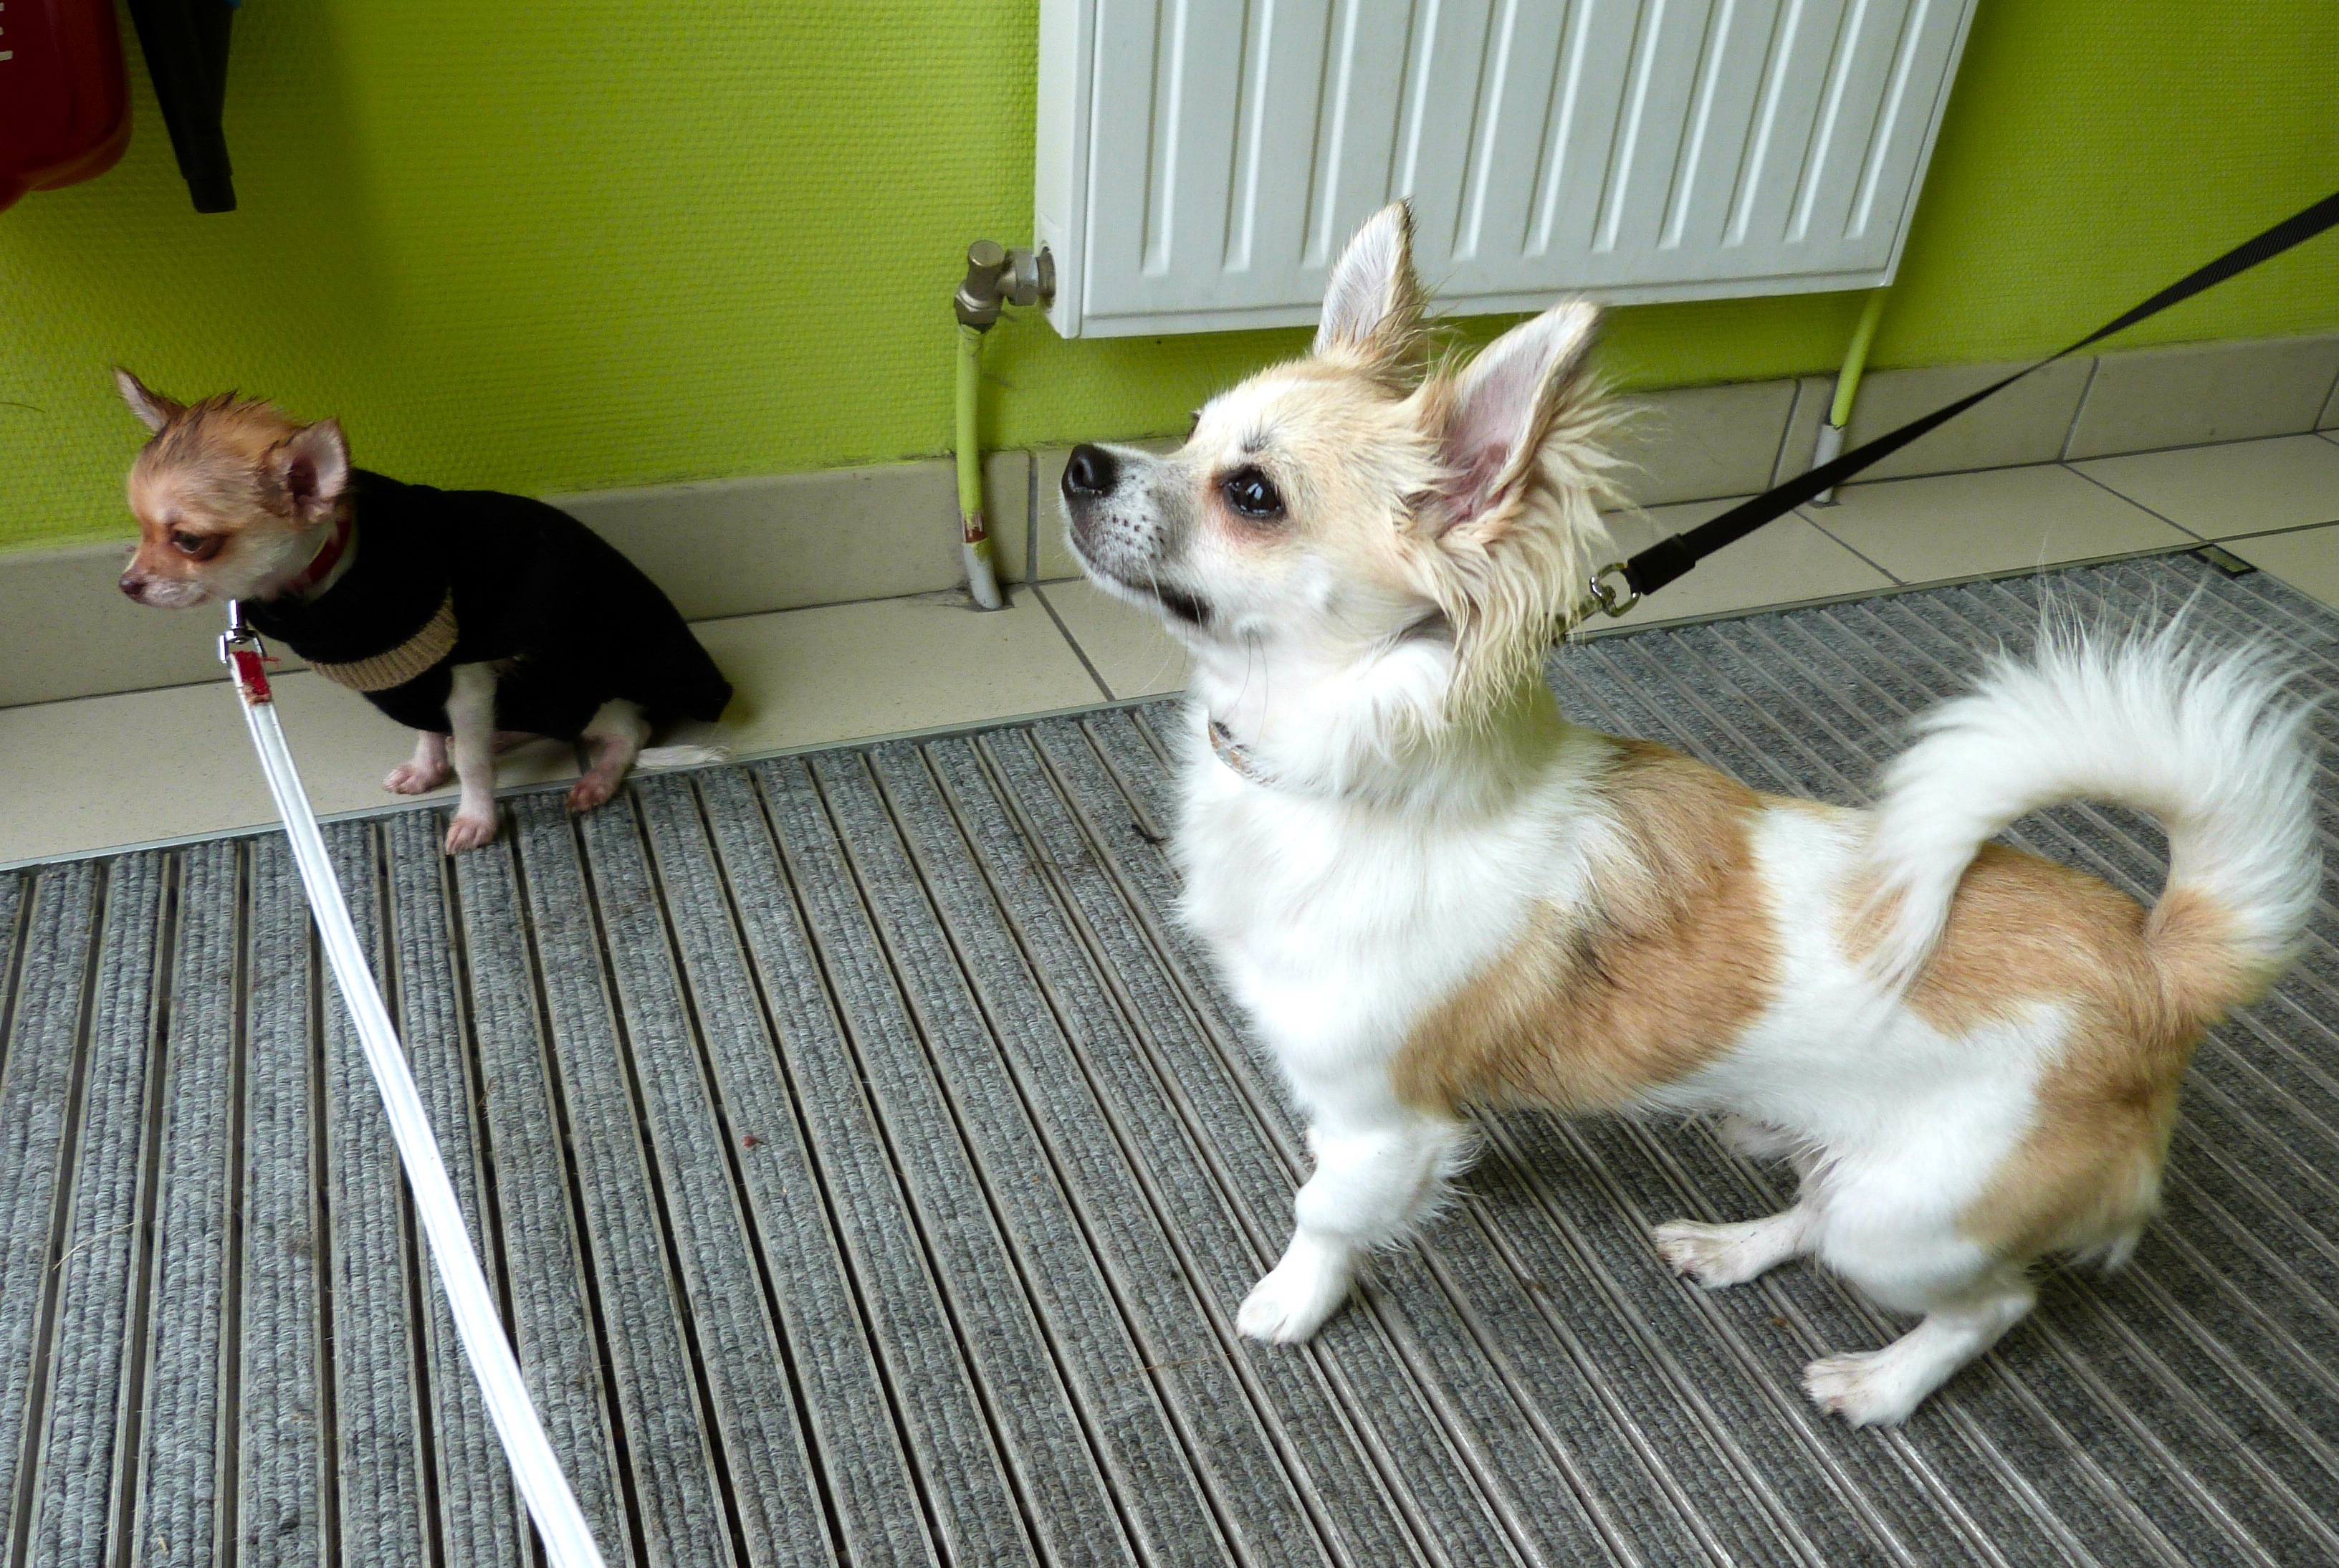 Hermes and Goliath, Animal, Cat, Chihuahua, Dog, HQ Photo